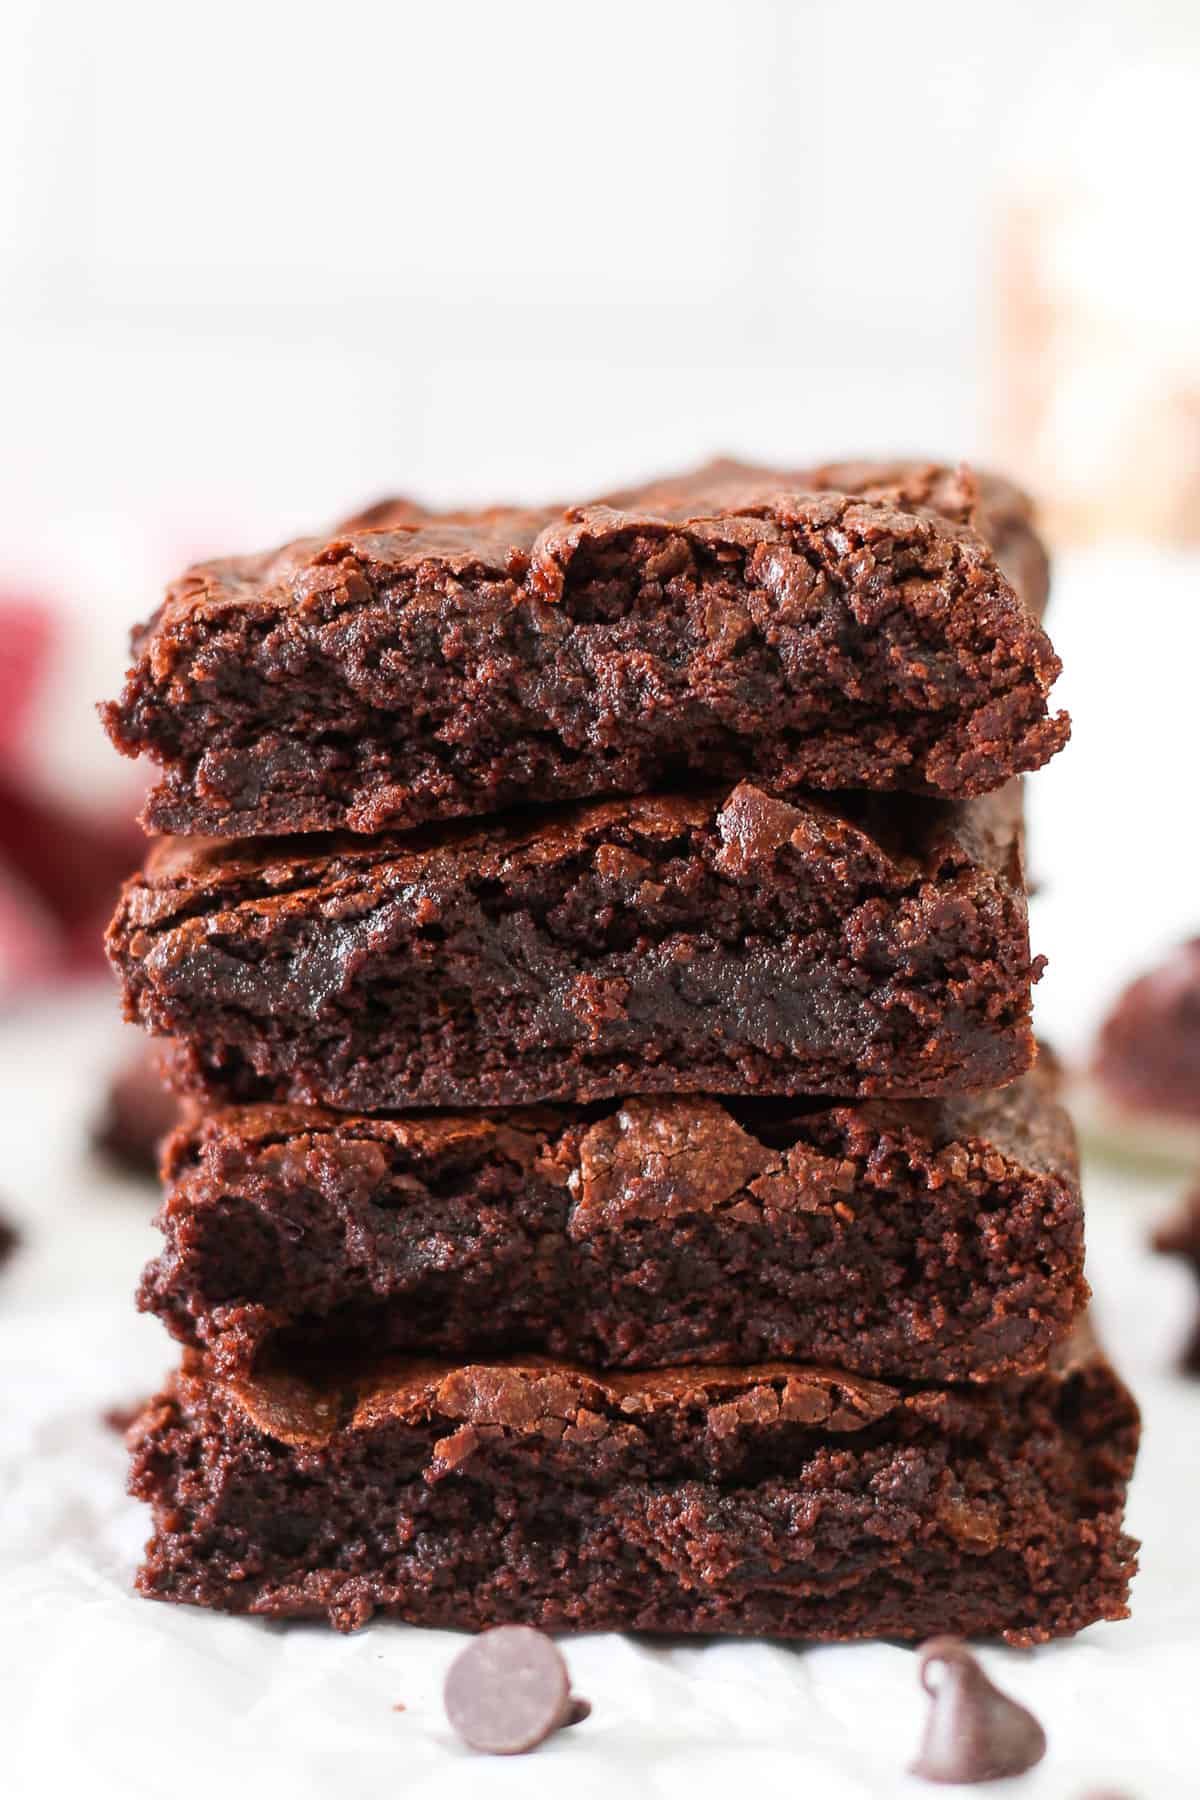 Four brownies stacked on top of each other with some chocolate chips in front.